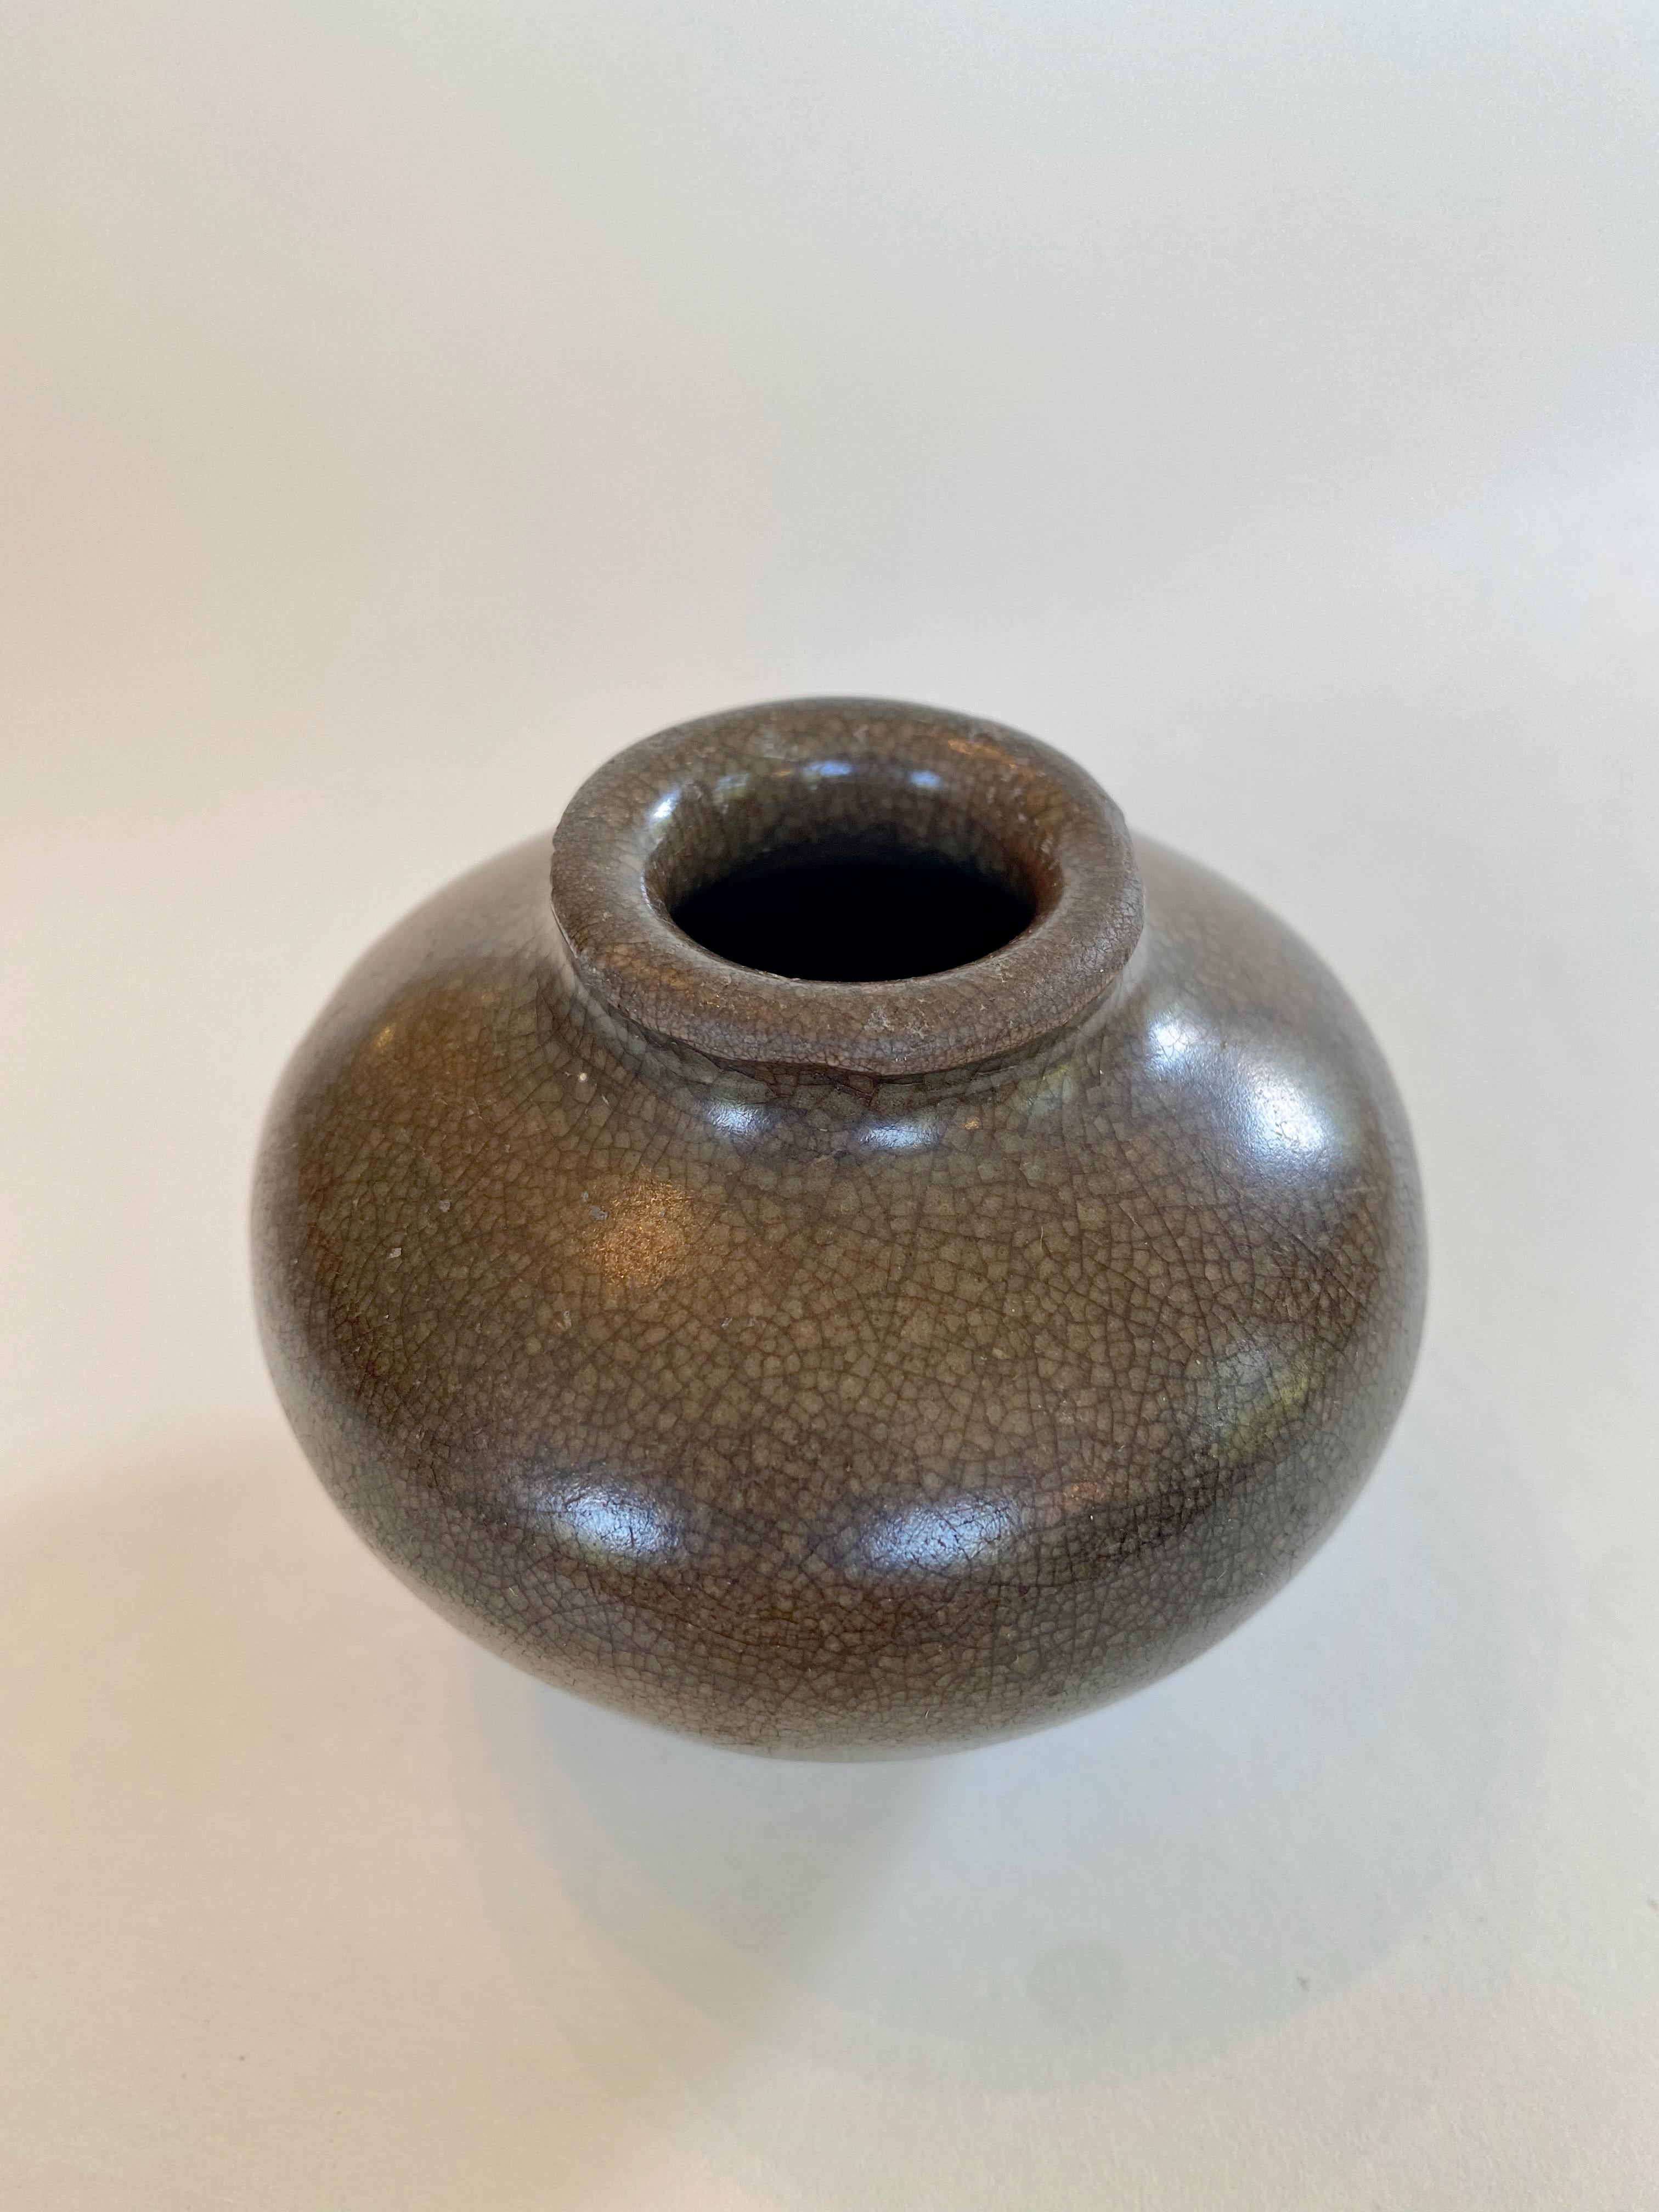 Song jarlet with deep brown glaze, 12th century. 

This small piece is all about purity of form, enhanced by the rich color of its glaze, which has a subtle crackle. The glaze, which covers almost the entire piece except for the very edge of its